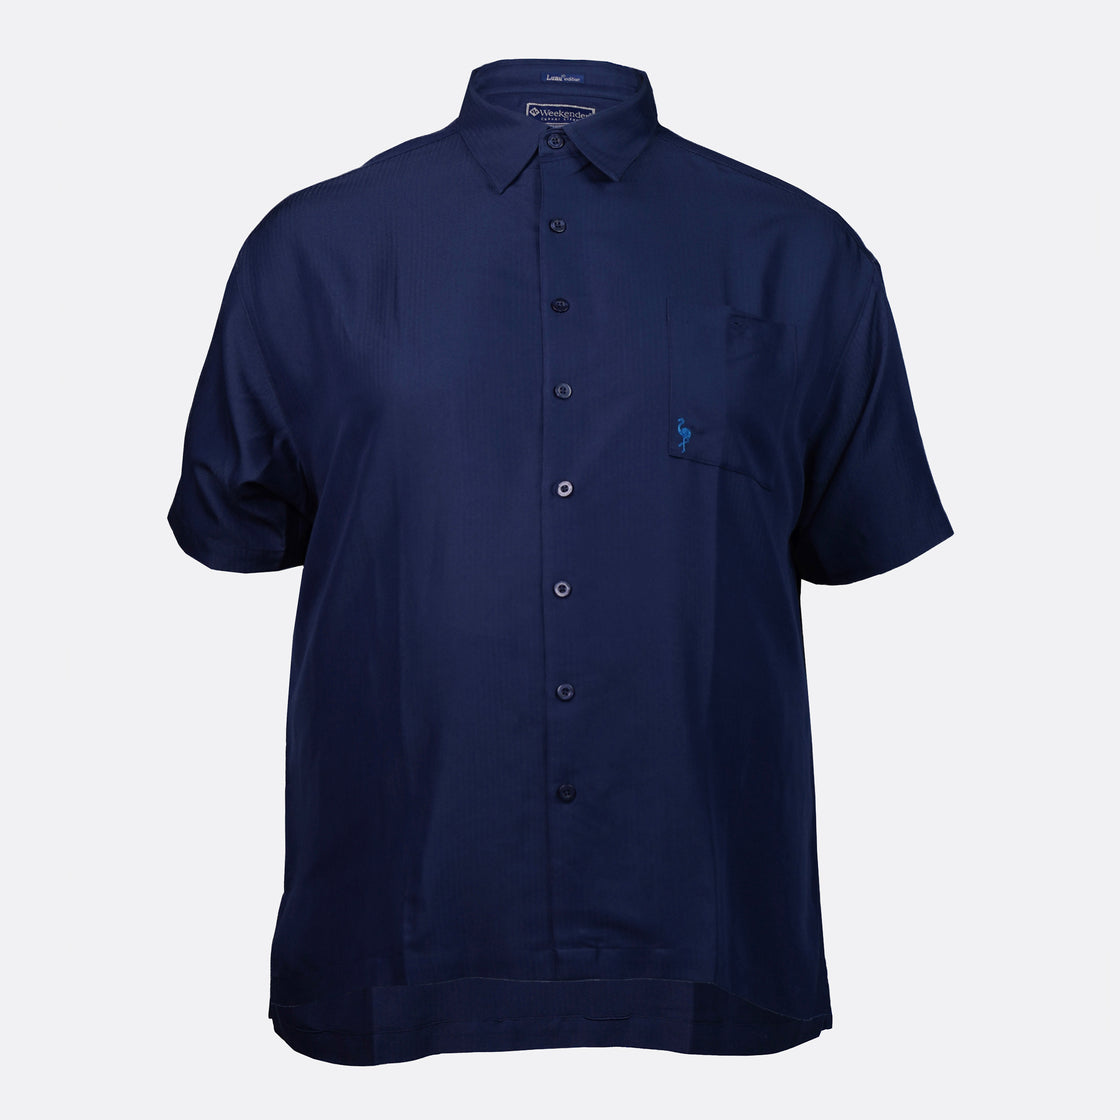 Weekender Collared Shirt with Design